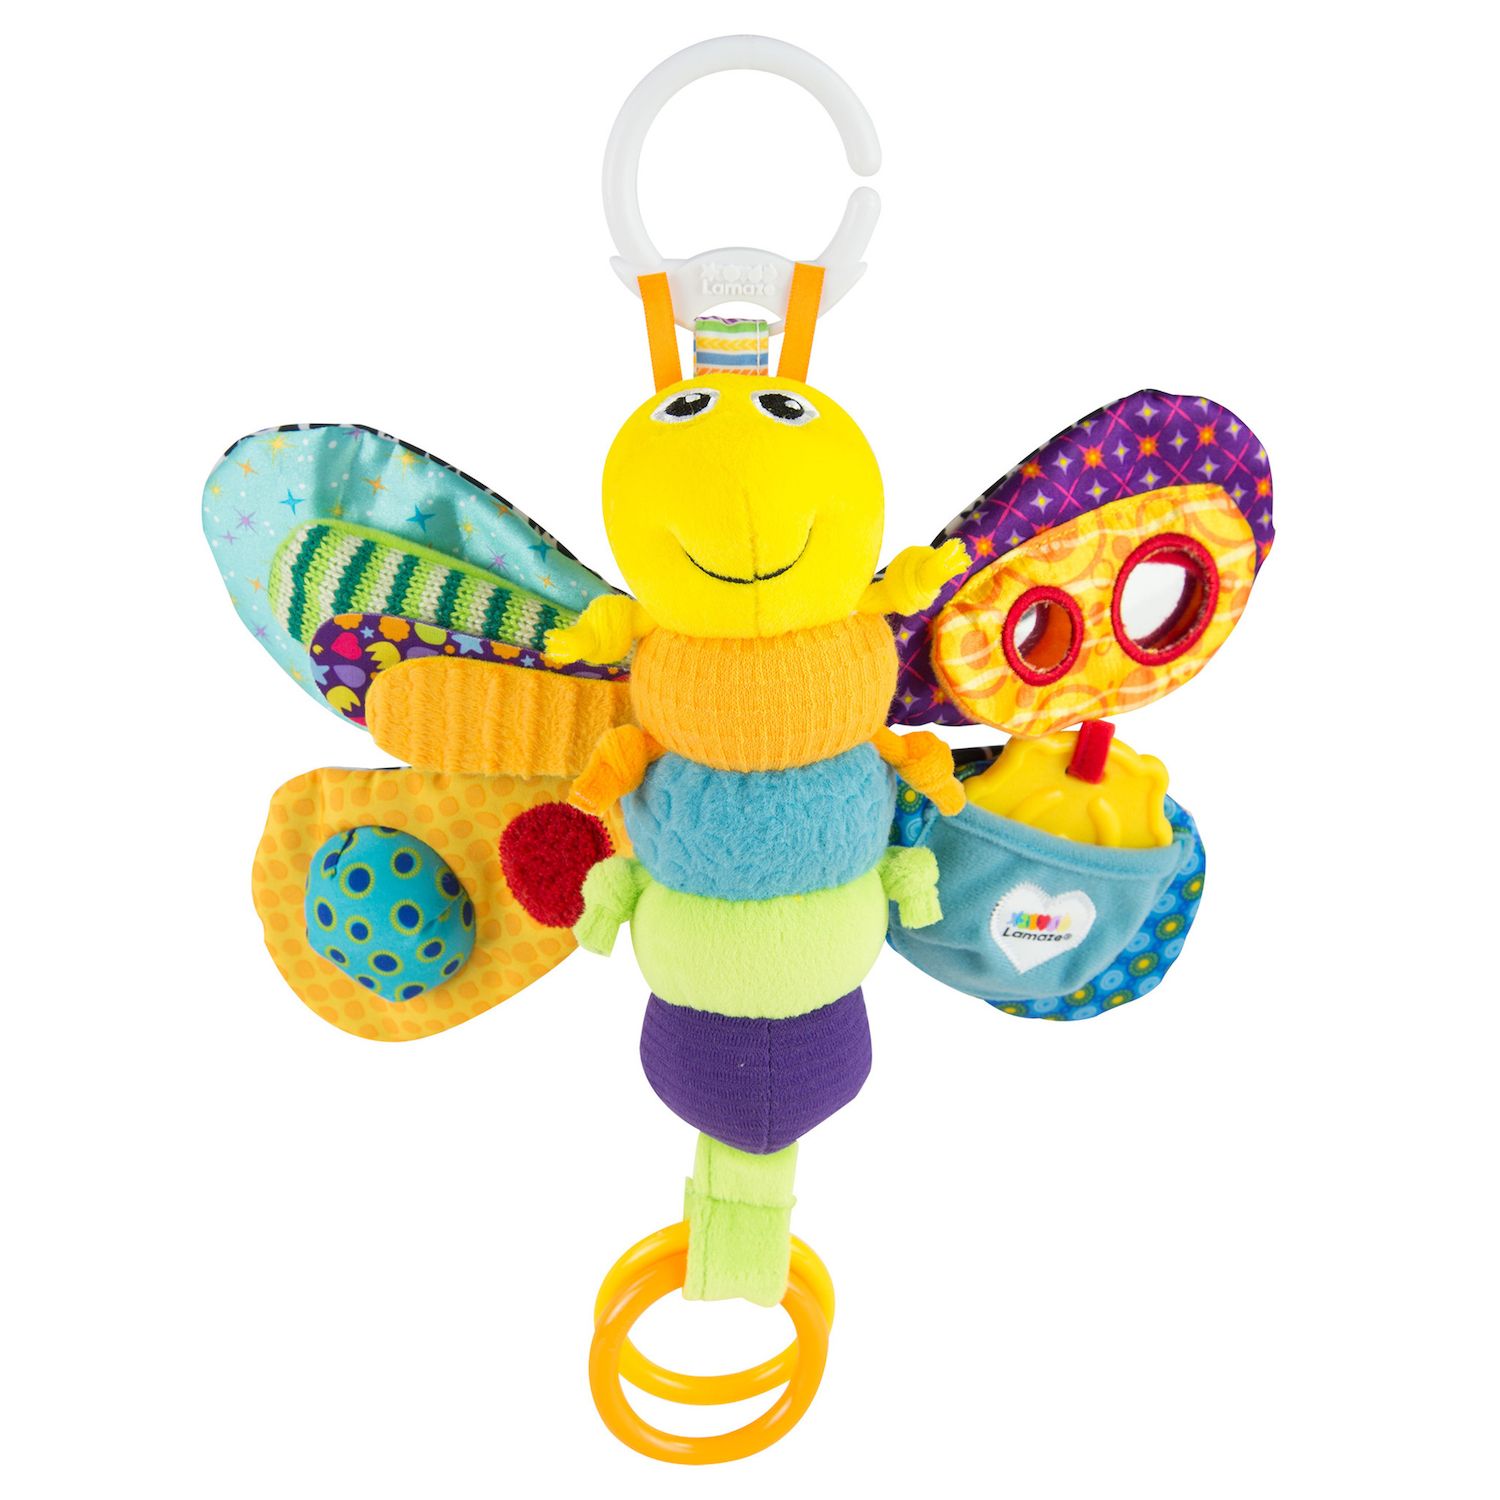 Lamaze® Play and Grow™ Freddie the 